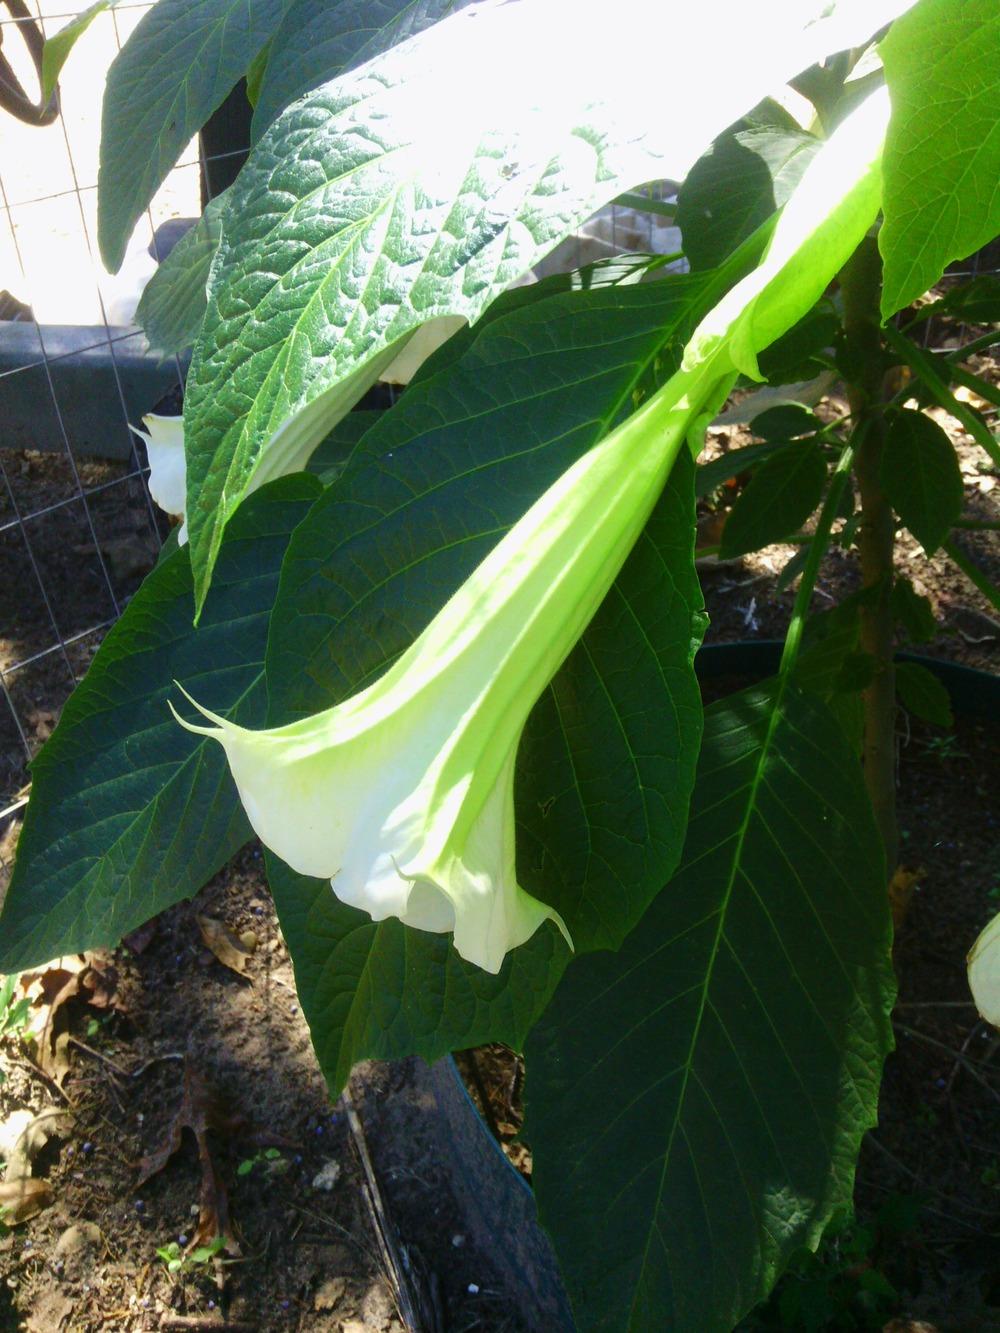 Photo of Angel's Trumpets (Brugmansia) uploaded by texaskitty111